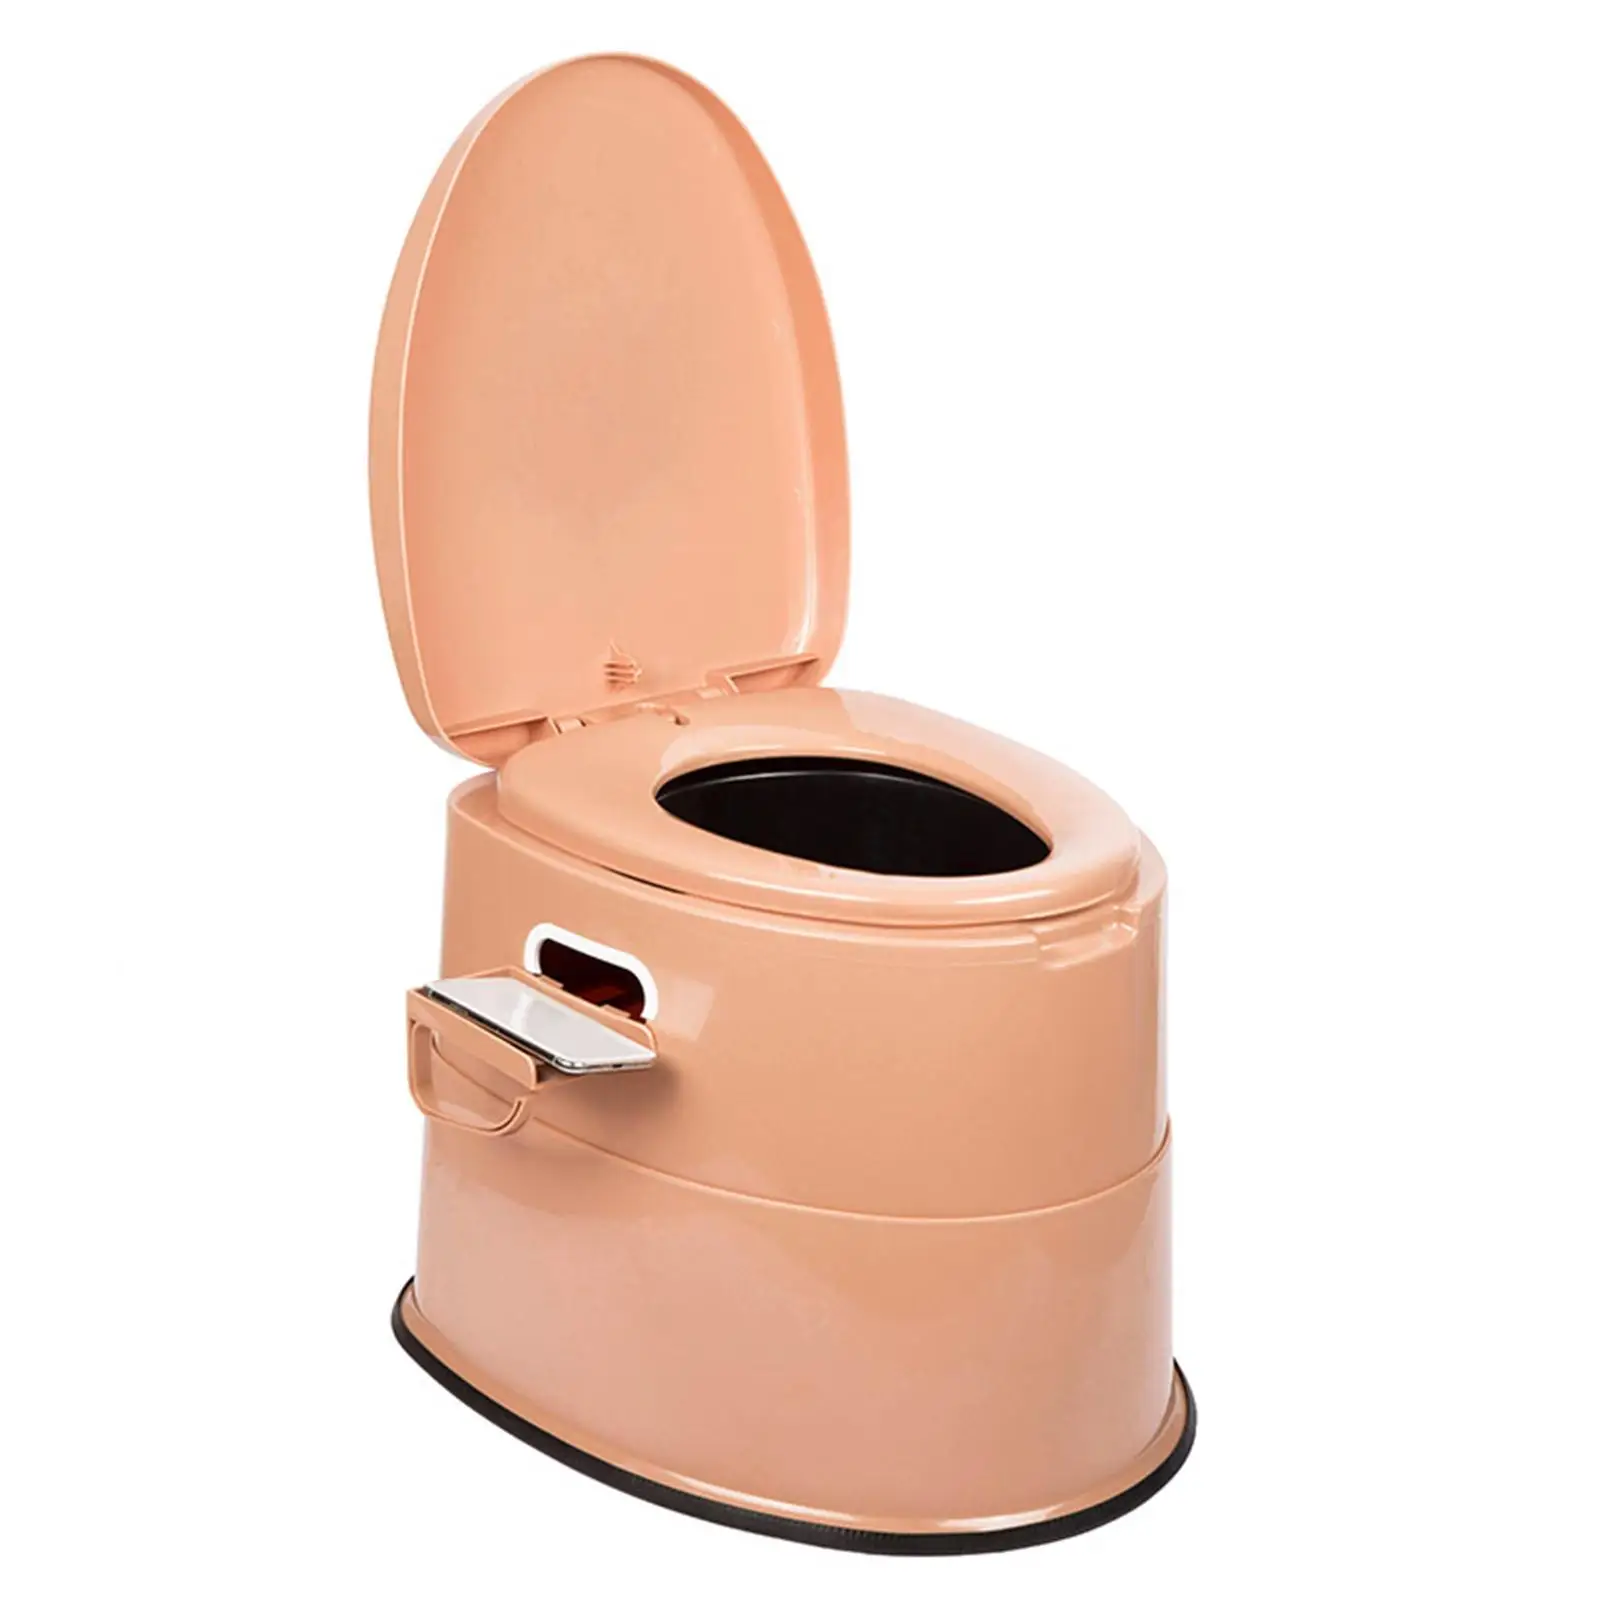 Portable Toilet Mobile Potty with Lid Outdoor Potty for Hiking Indoor